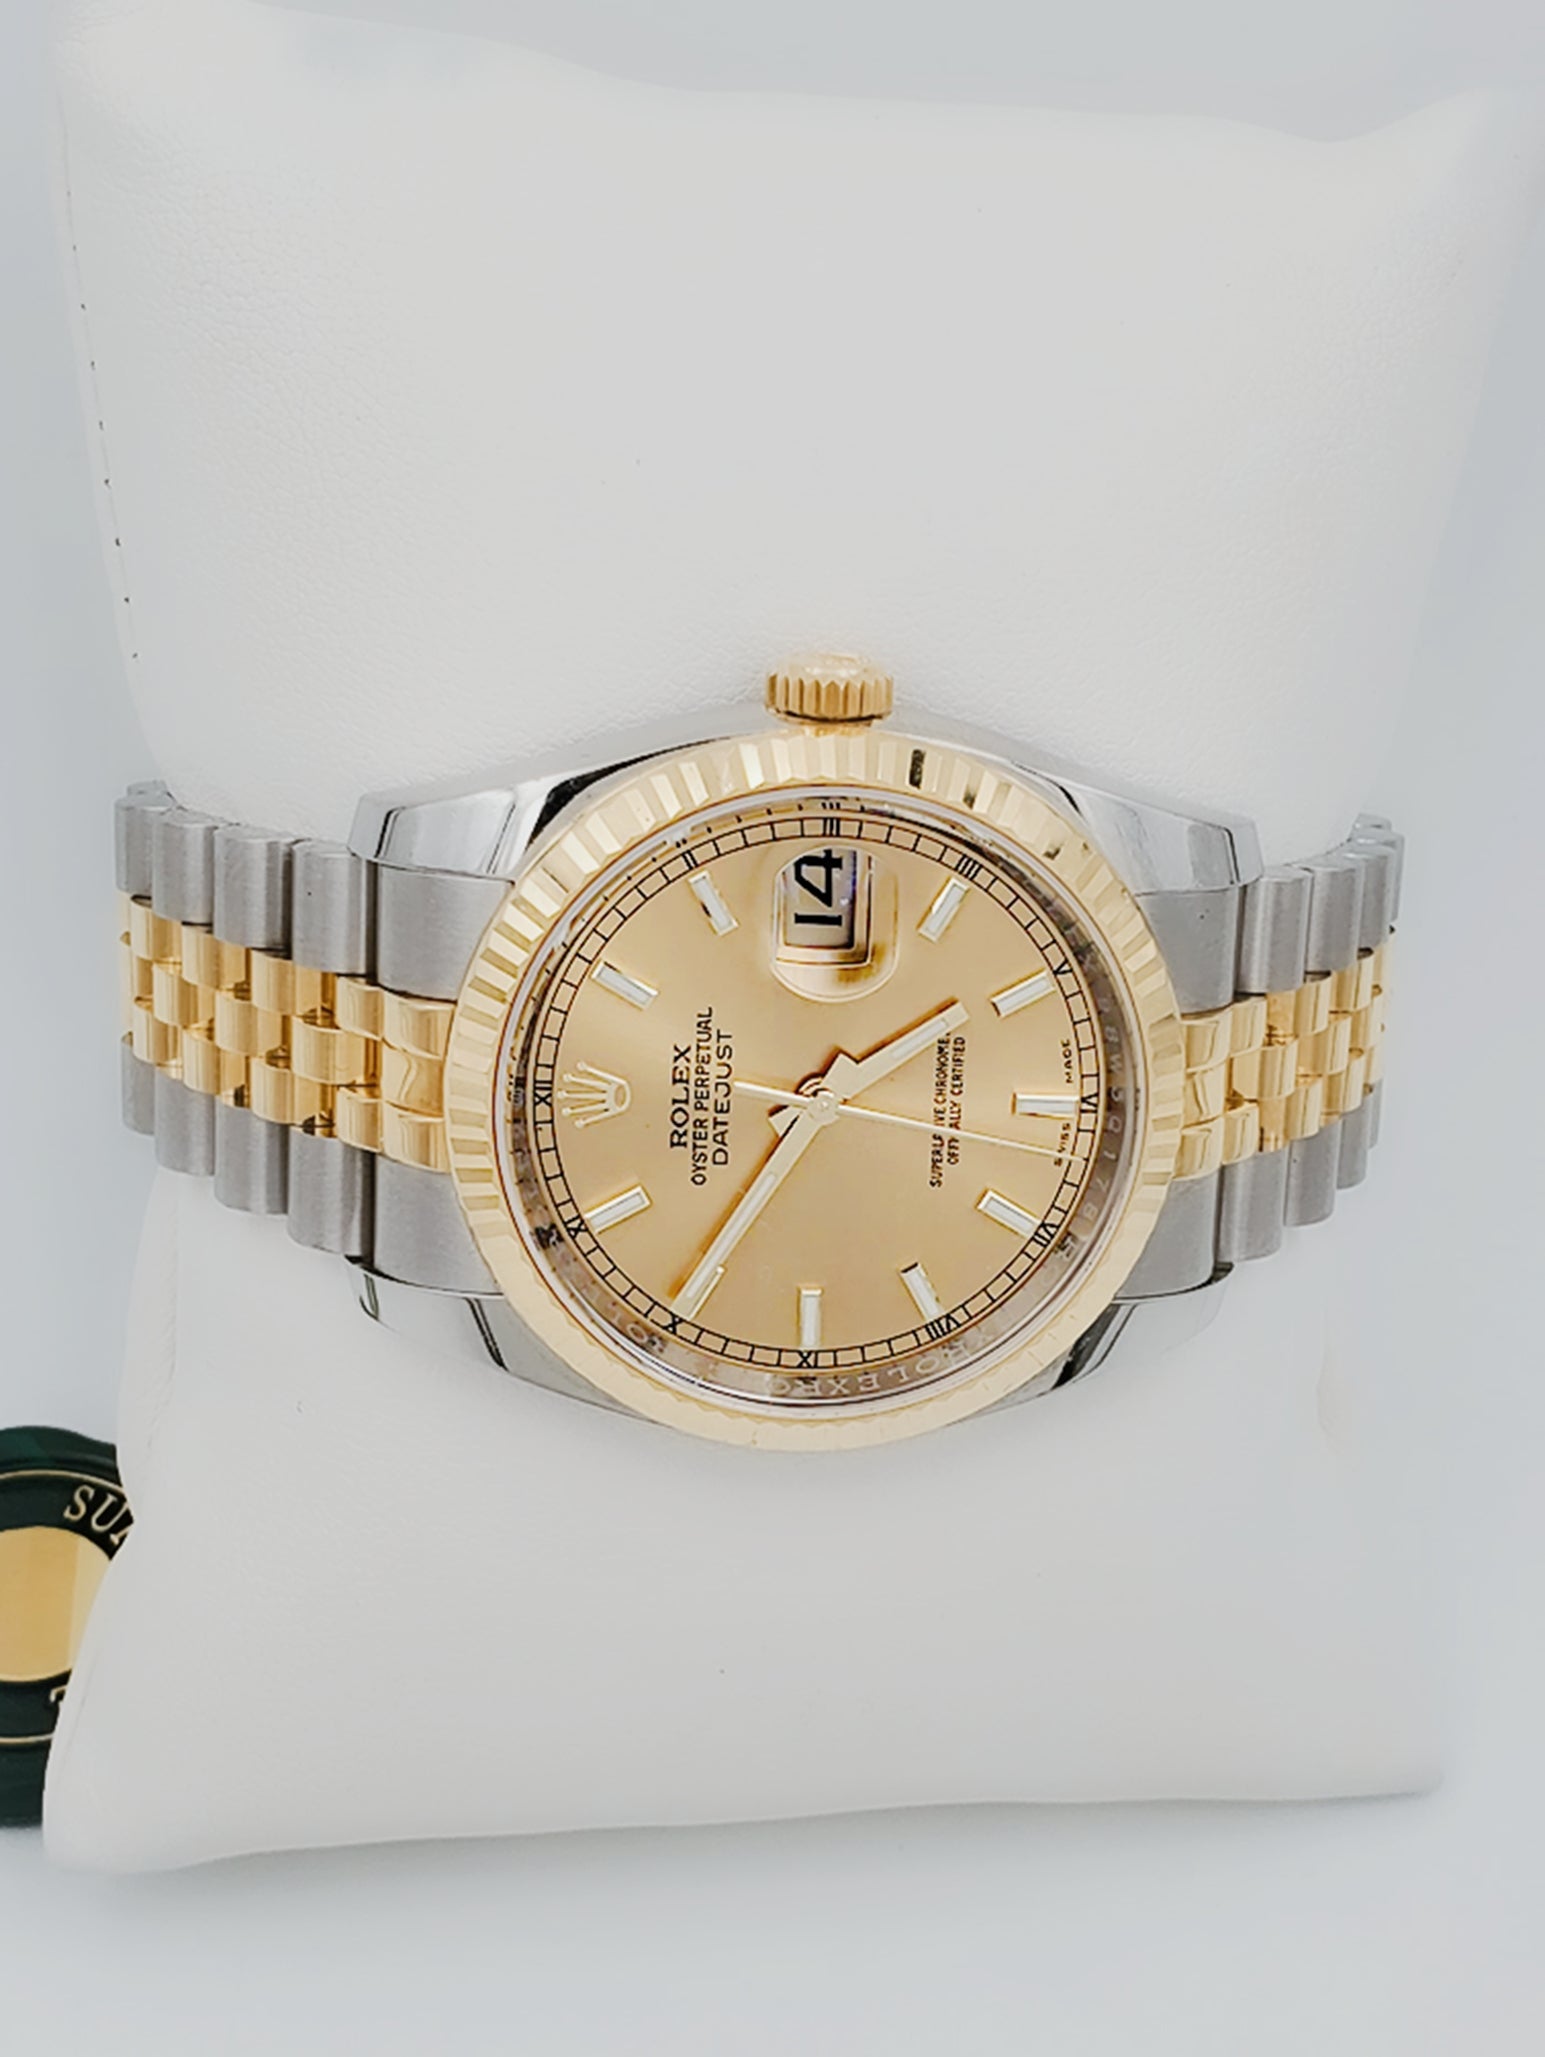 Men's Rolex 38mm DateJust 18K Yellow Gold / Stainless Steel Two Tone Watch with Champagne Dial and Fluted Bezel. (Pre-Owned 16233)